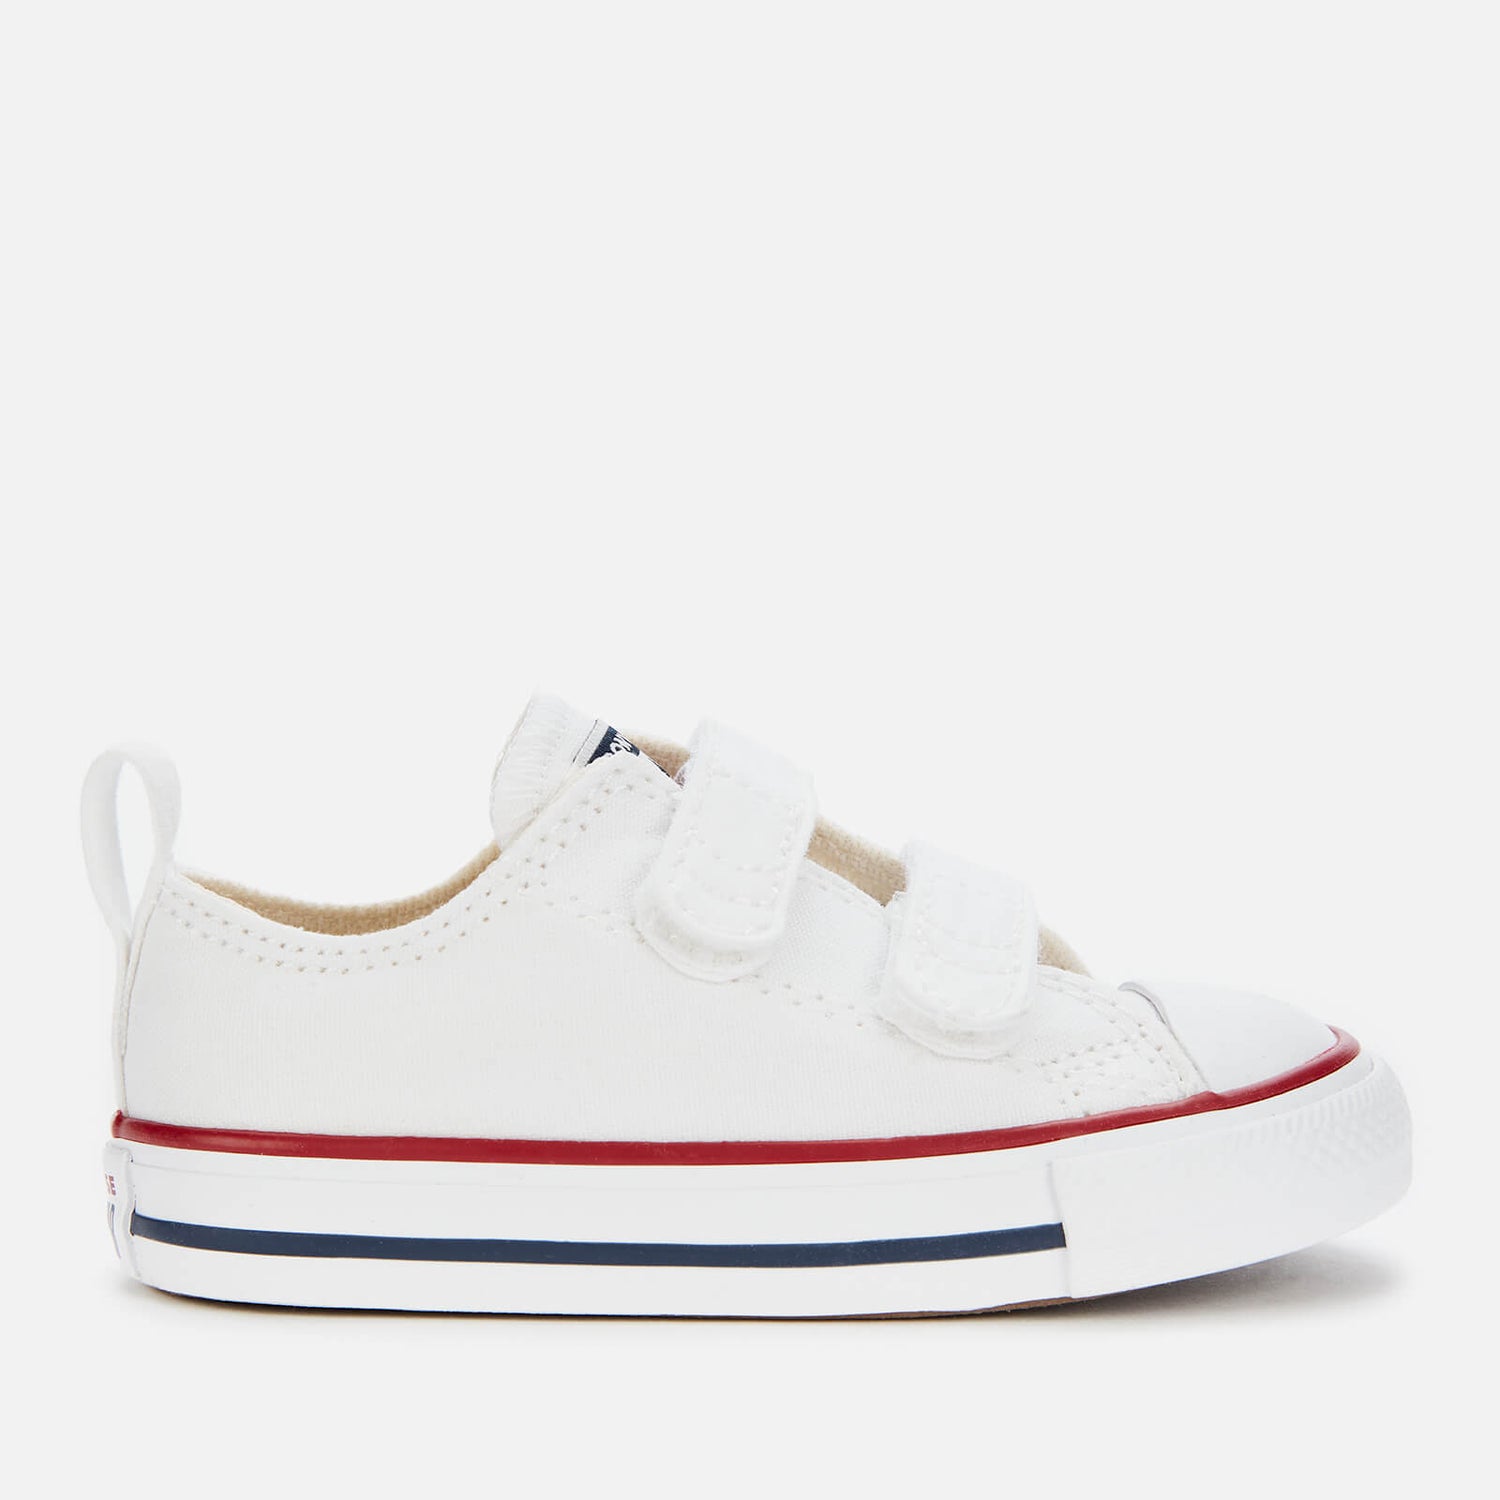 Converse Toddlers' Chuck Taylor All Star Ox Velcro Trainers - White